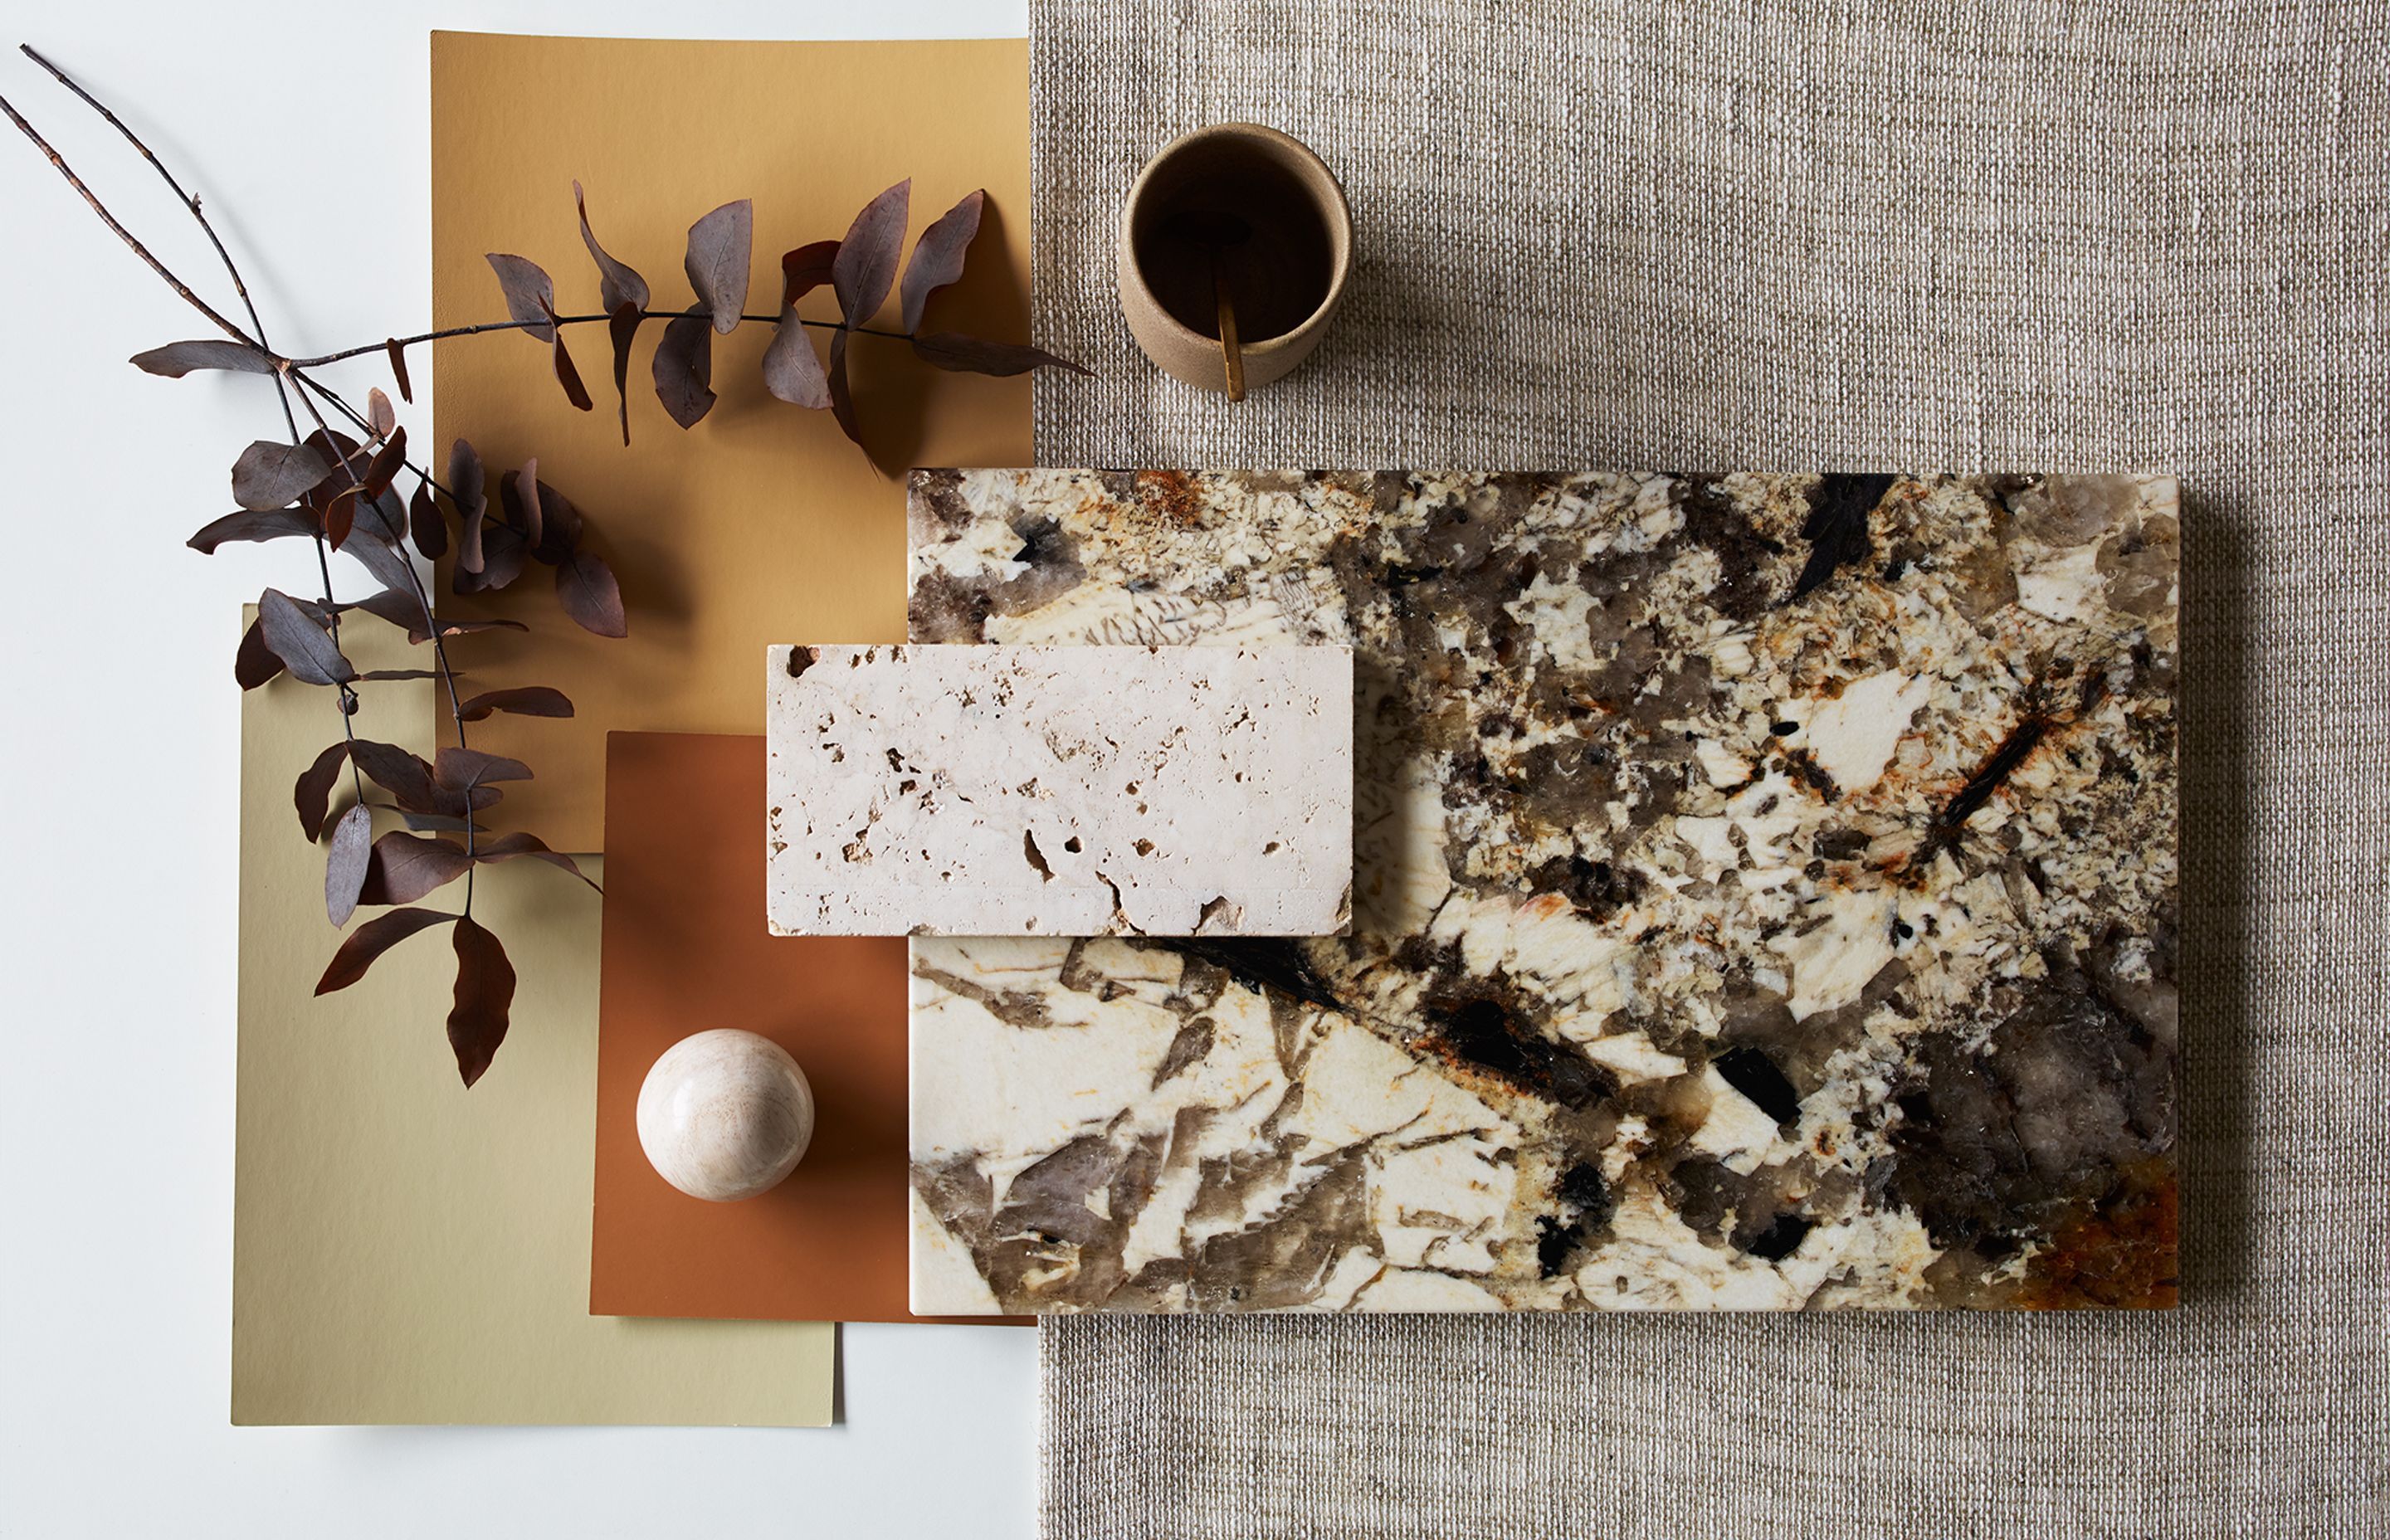 This materials board by James Dunlop Textiles includes the brand's organic, open weave Homespun textile – paired with warm tones and stone textures.